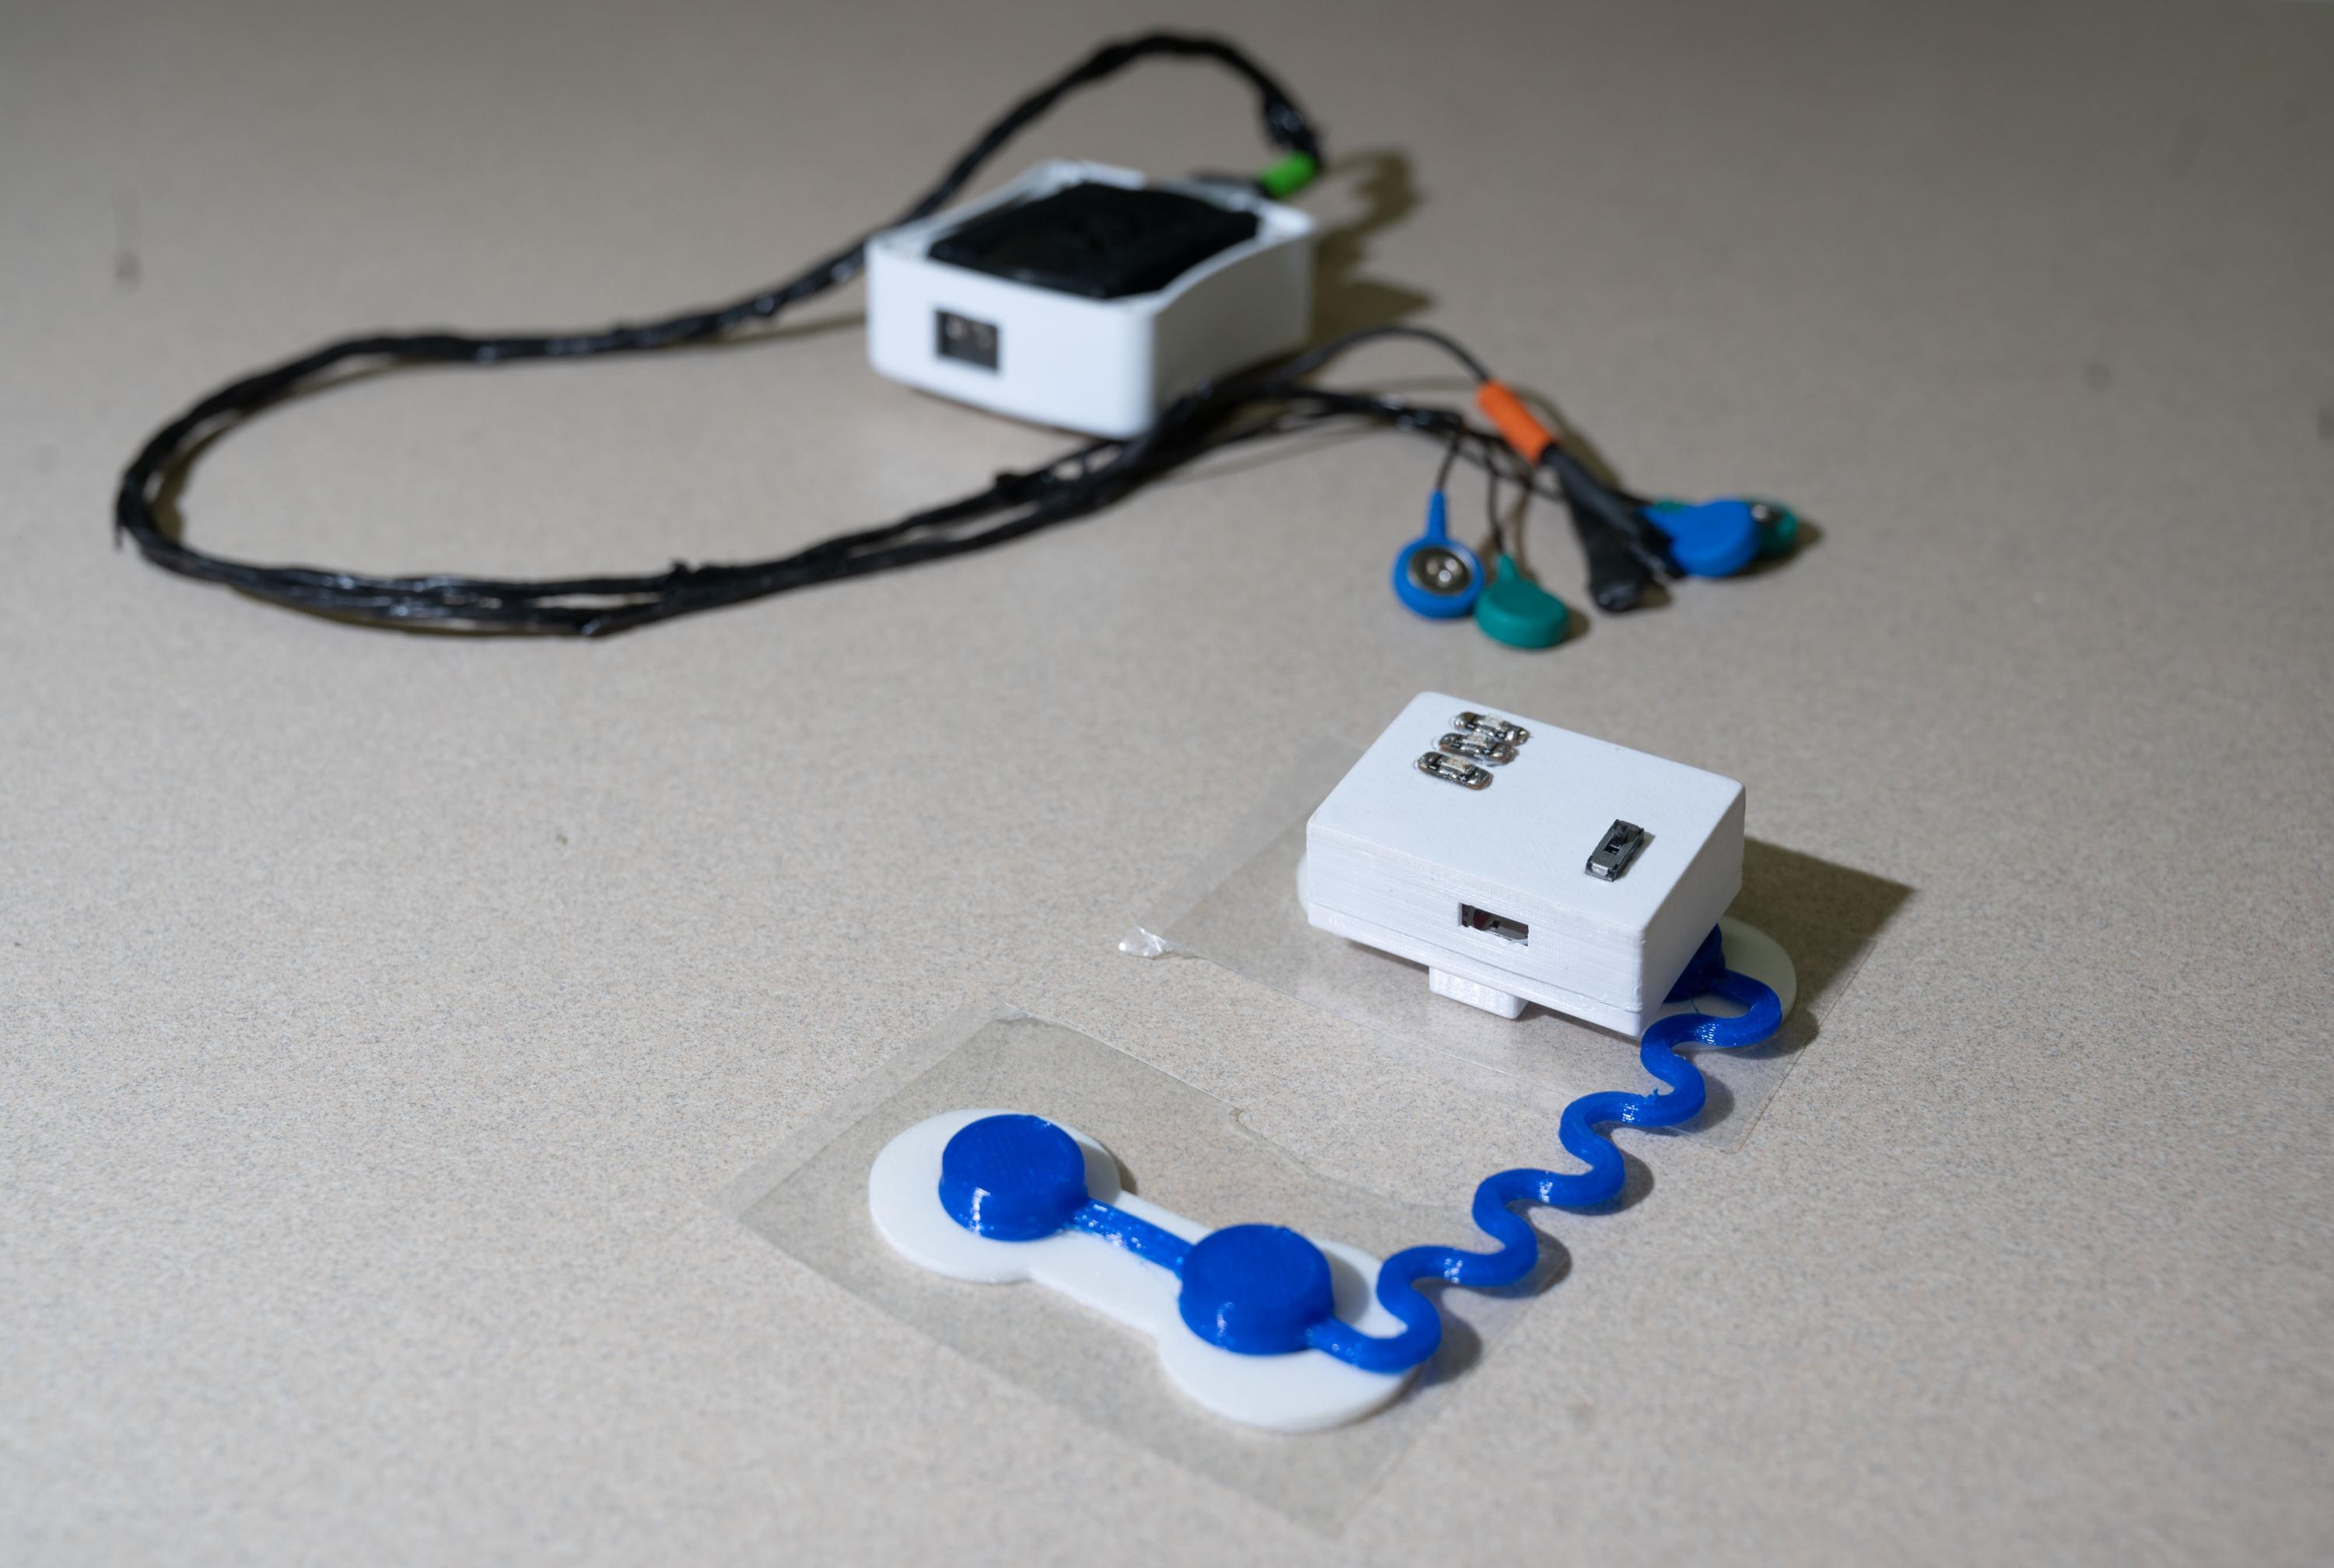 Prototypes of the biompedance sensor for IV safety monitoring.